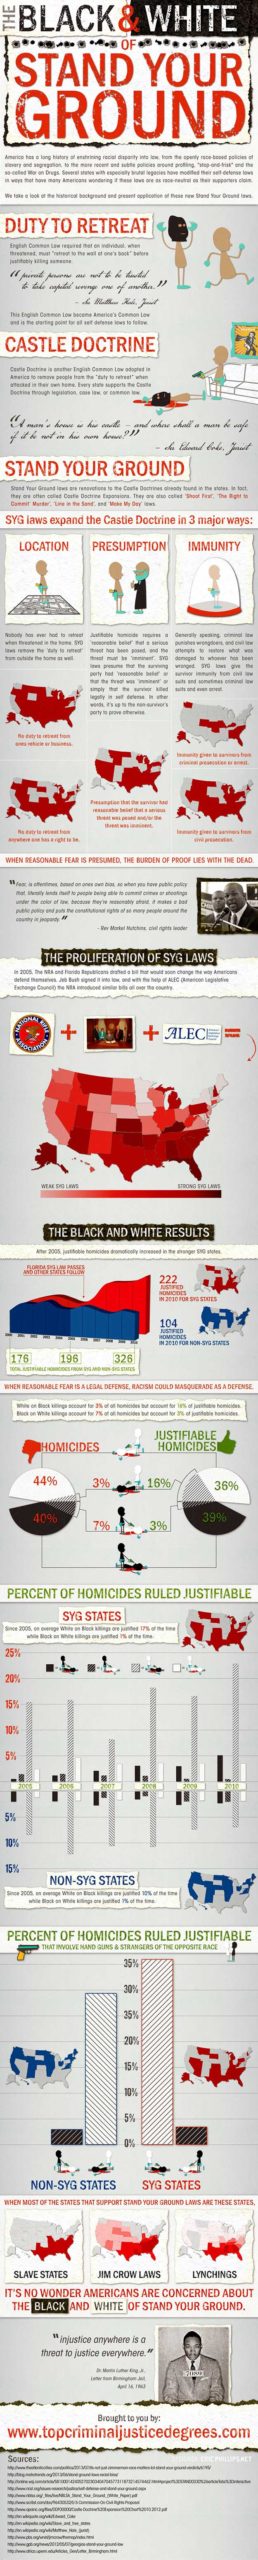 Stand your ground laws infographic